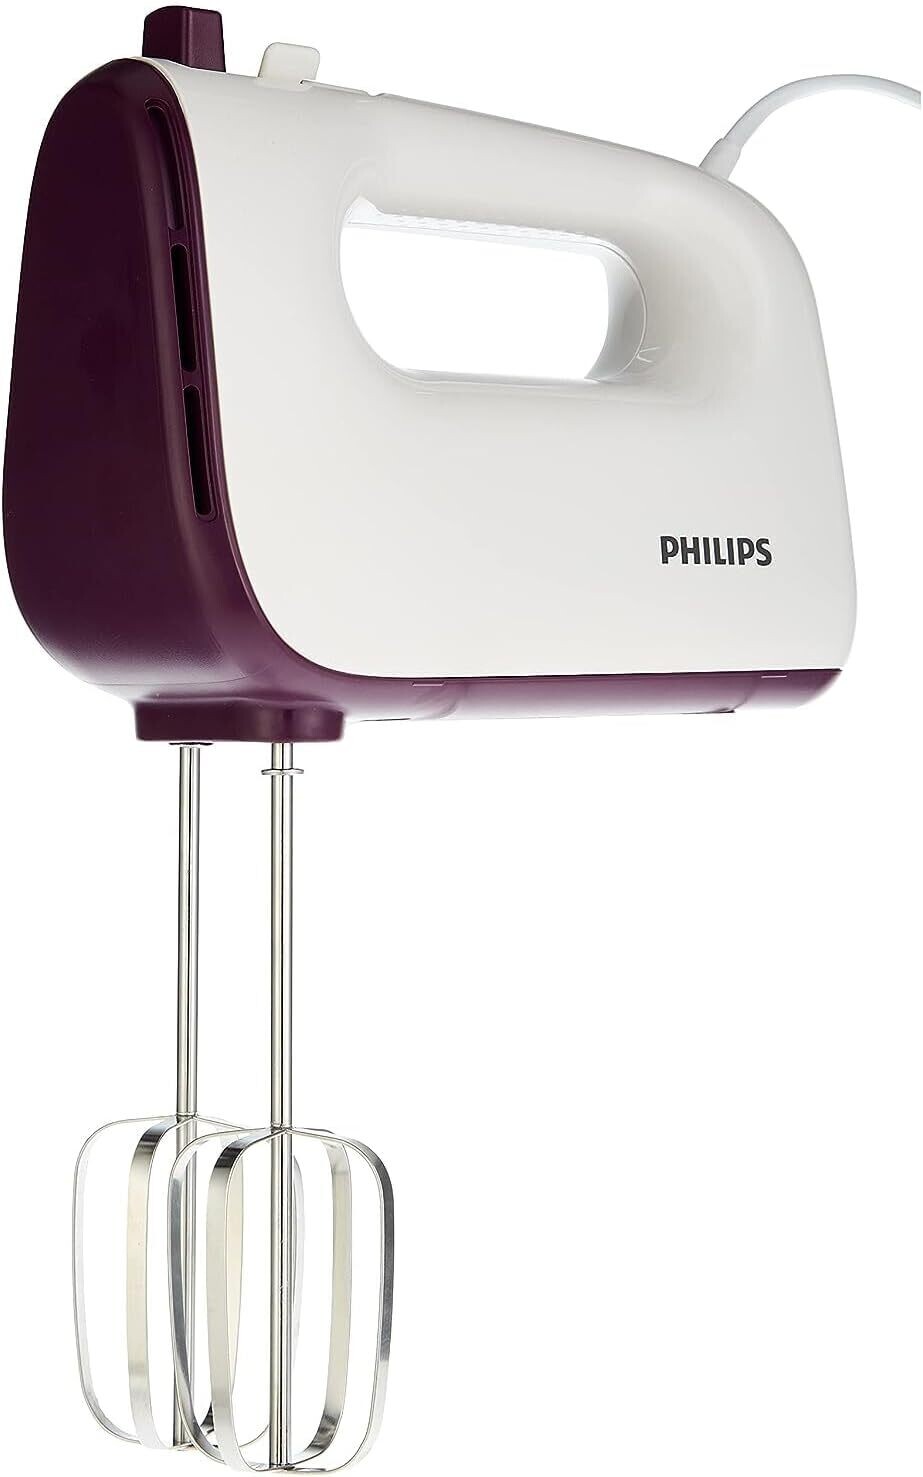 PHILIPS Daily Hand Mixer HR3740/11: 400W, 5 Speeds, Turbo, Stainless Steel Beaters